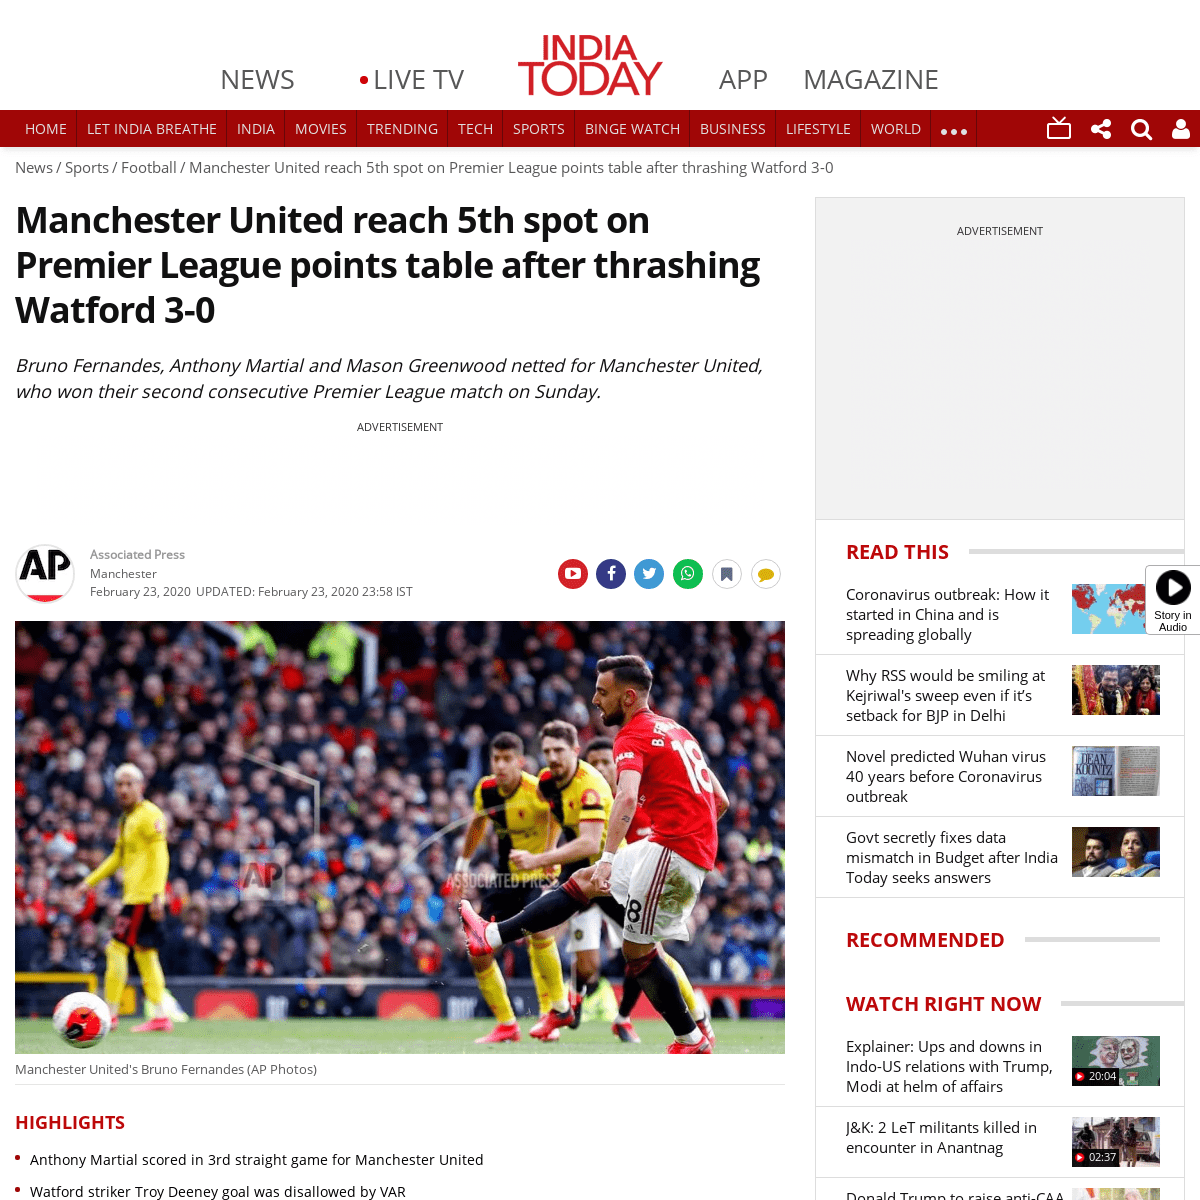 A complete backup of www.indiatoday.in/sports/football/story/manchester-united-vs-watford-premier-league-reach-5th-spot-on-premi